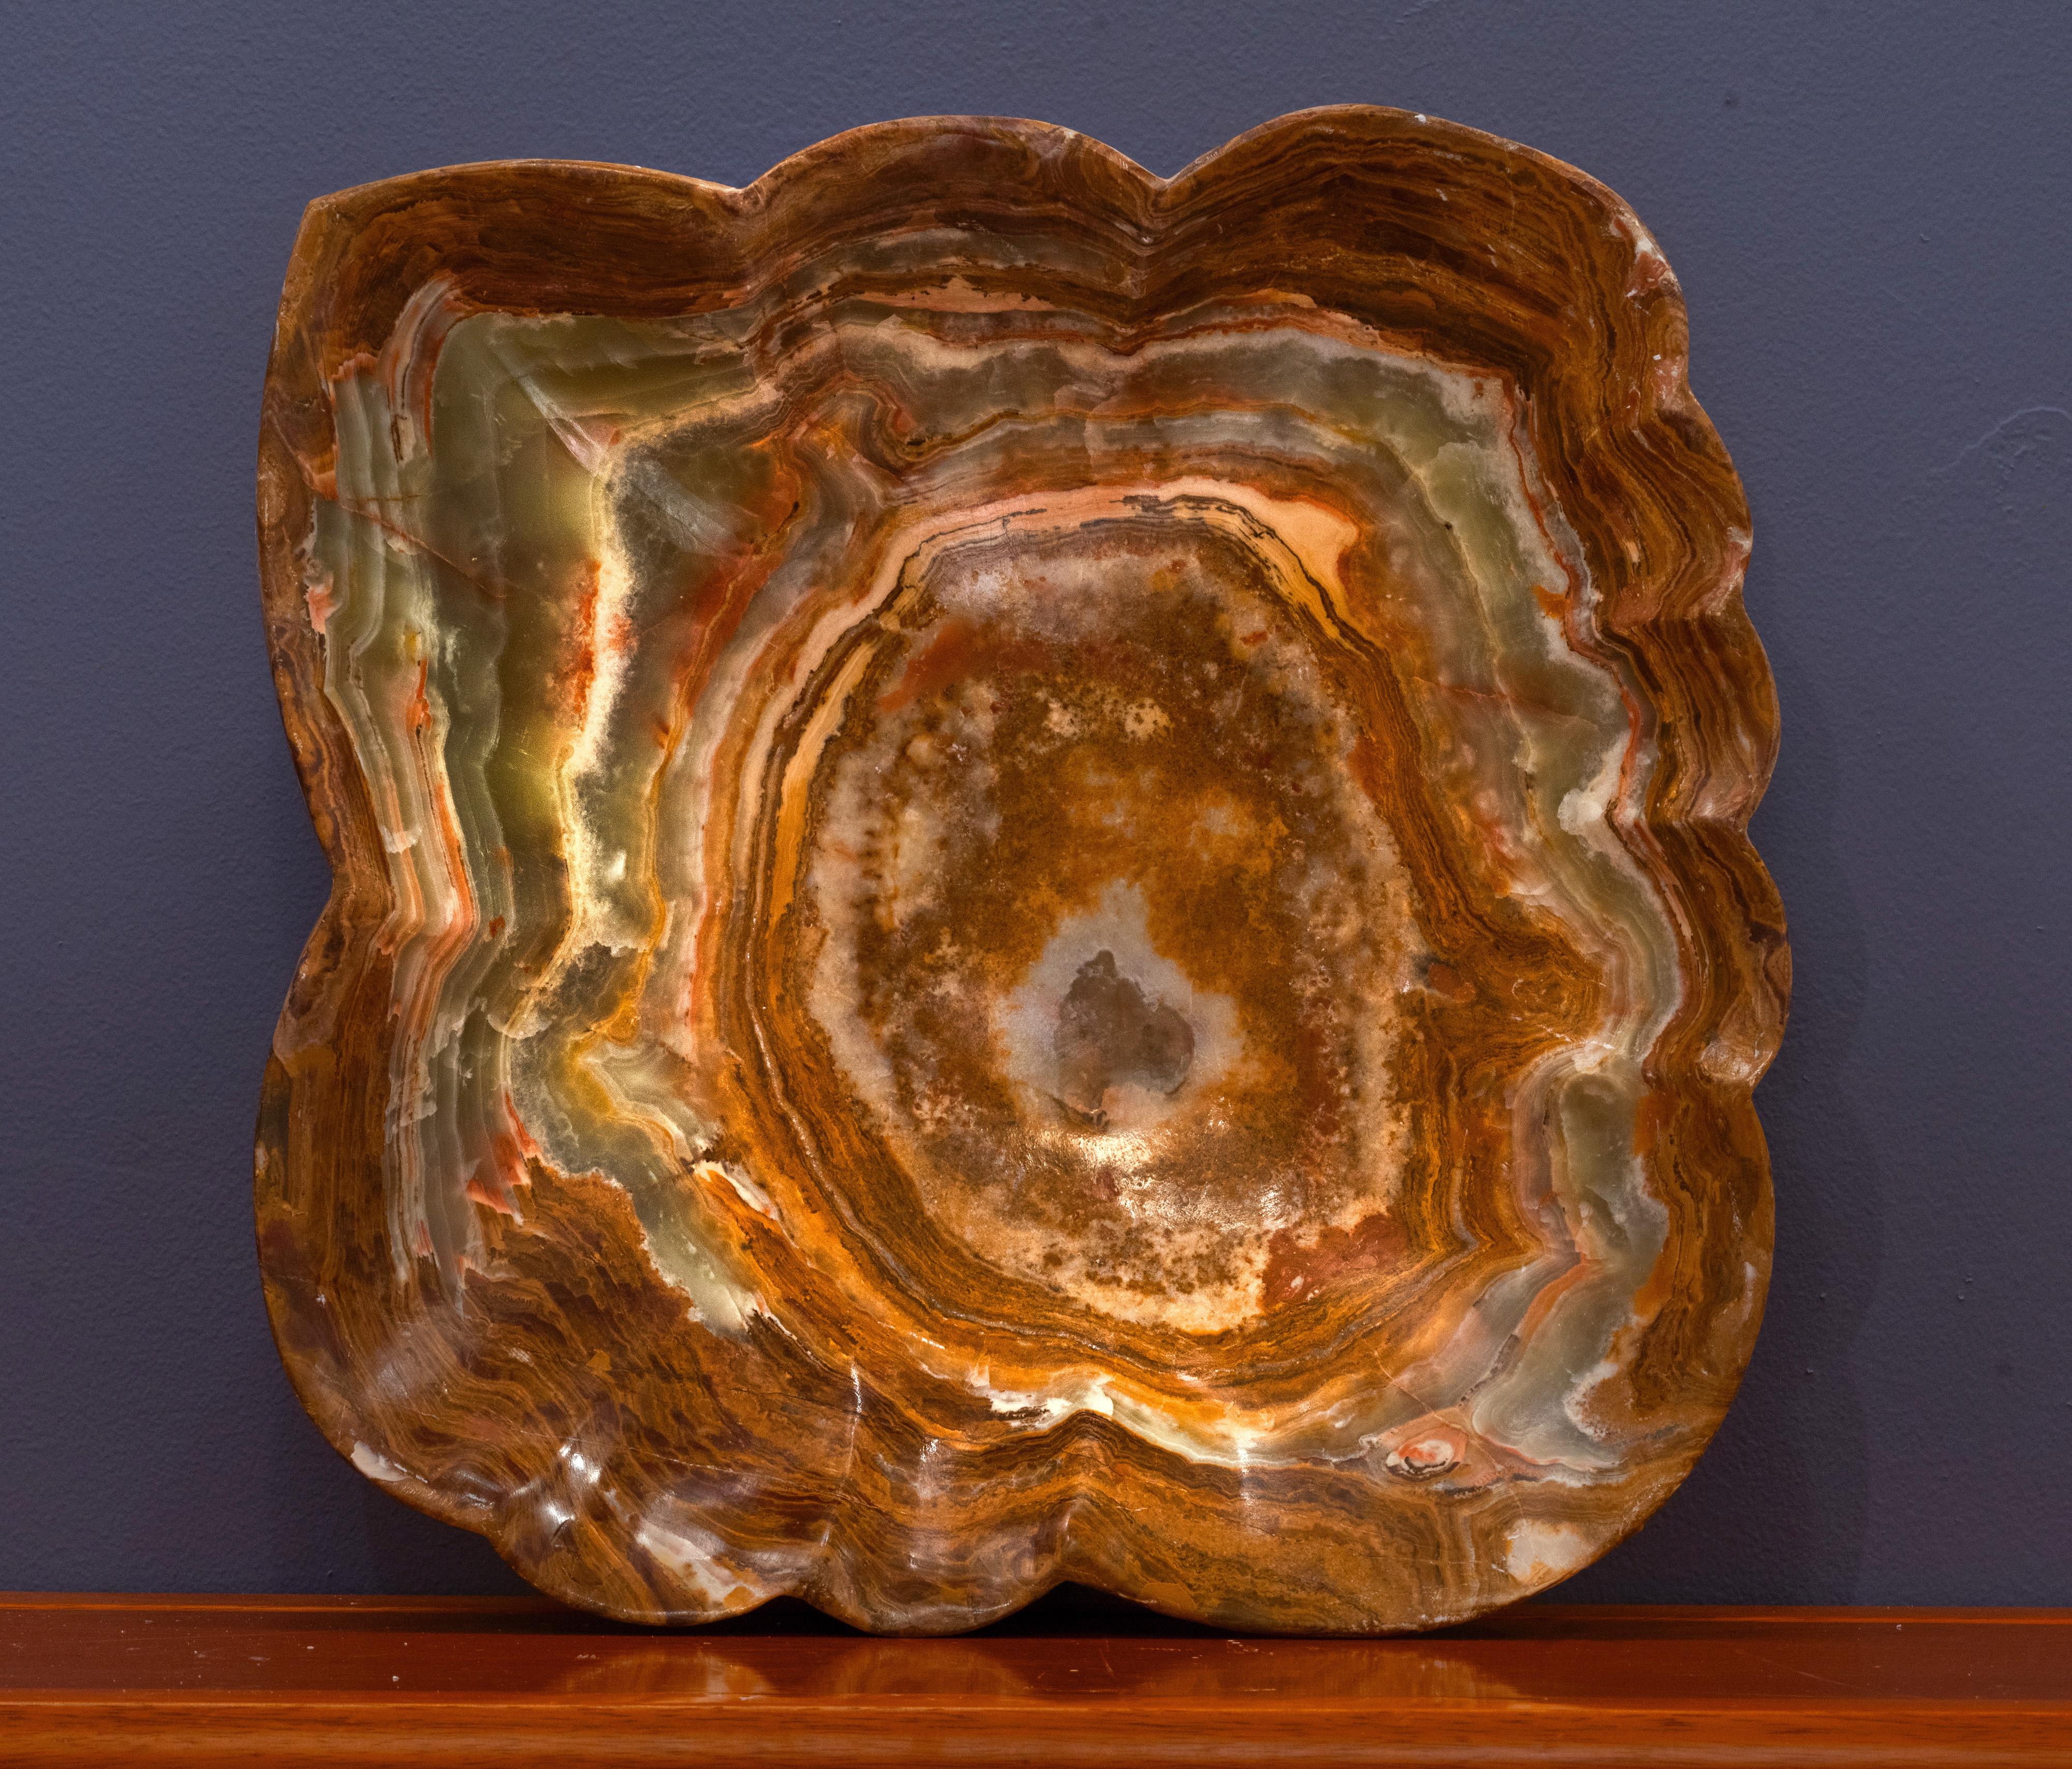 This gorgeously hand-carved 20.5 pound genuine banded onyx freeform bowl from Pakistan features intensely pigmented earthy green and rich brown bands and swirls accented by contrasting tan. This dynamic bowl – the perfect size for a large